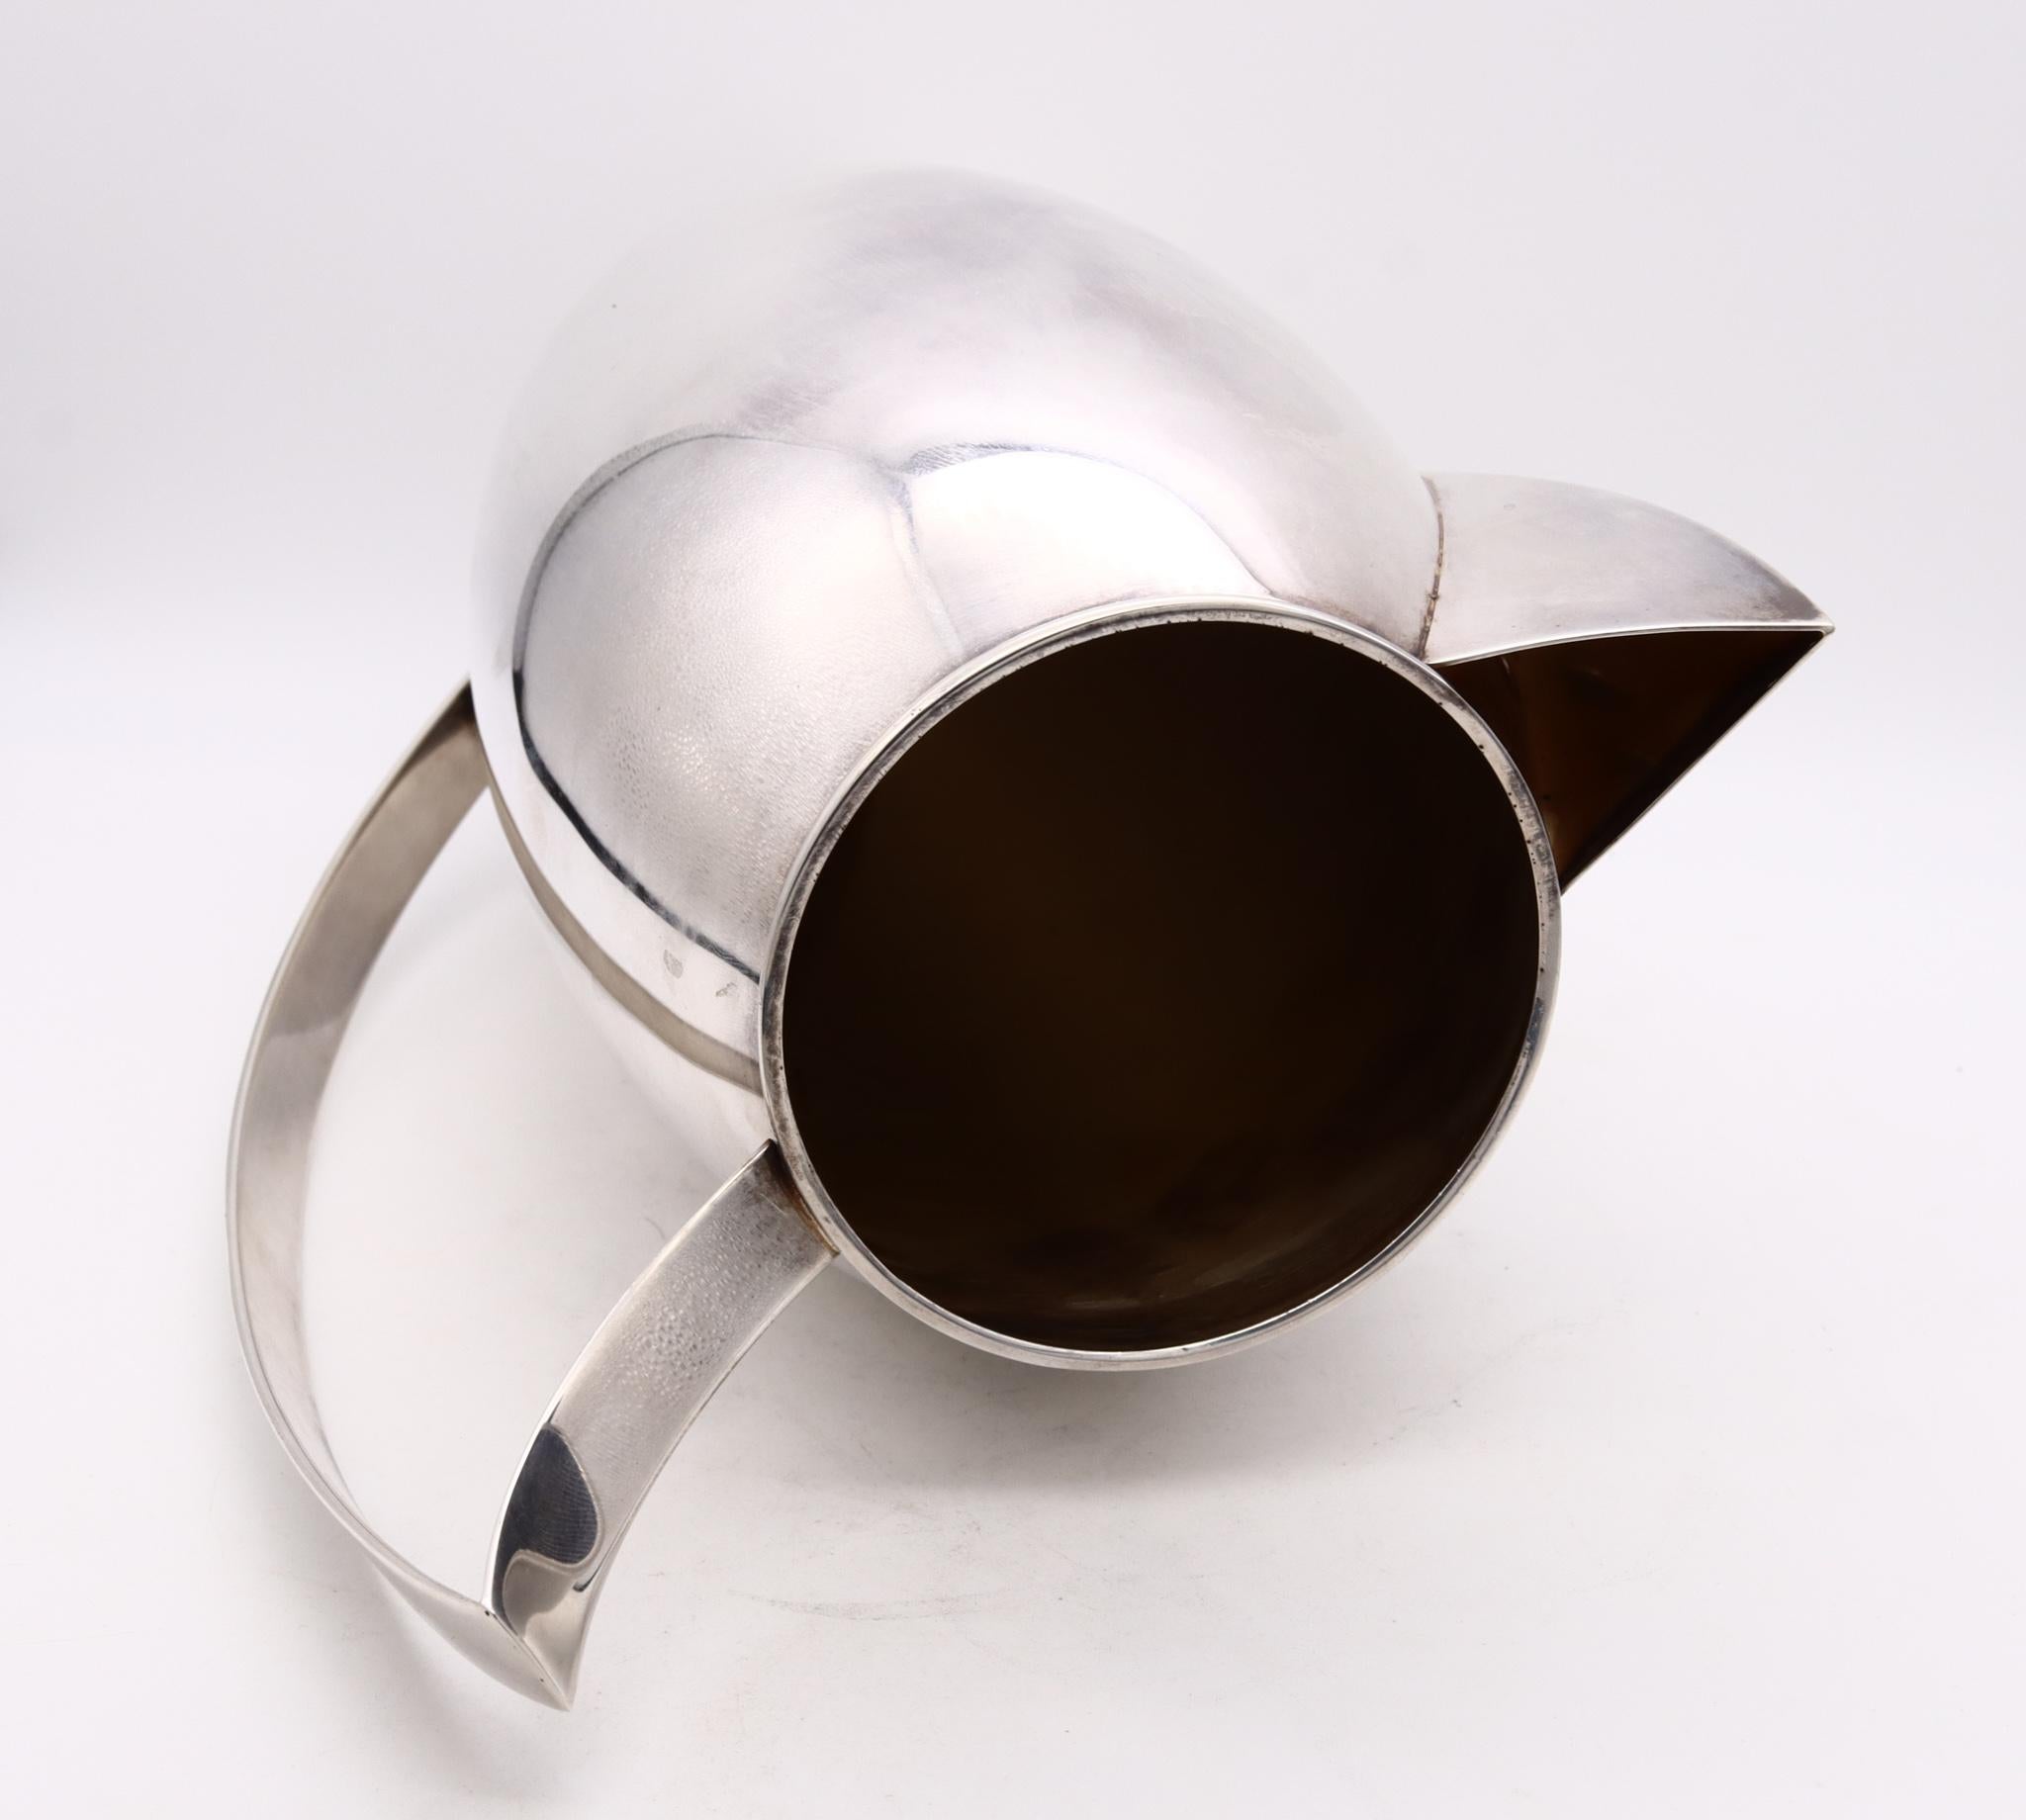 Streamlined Moderne Cleto Munari 1985 Milano Architectural Water Pitcher Jar in Solid .925 Sterling For Sale